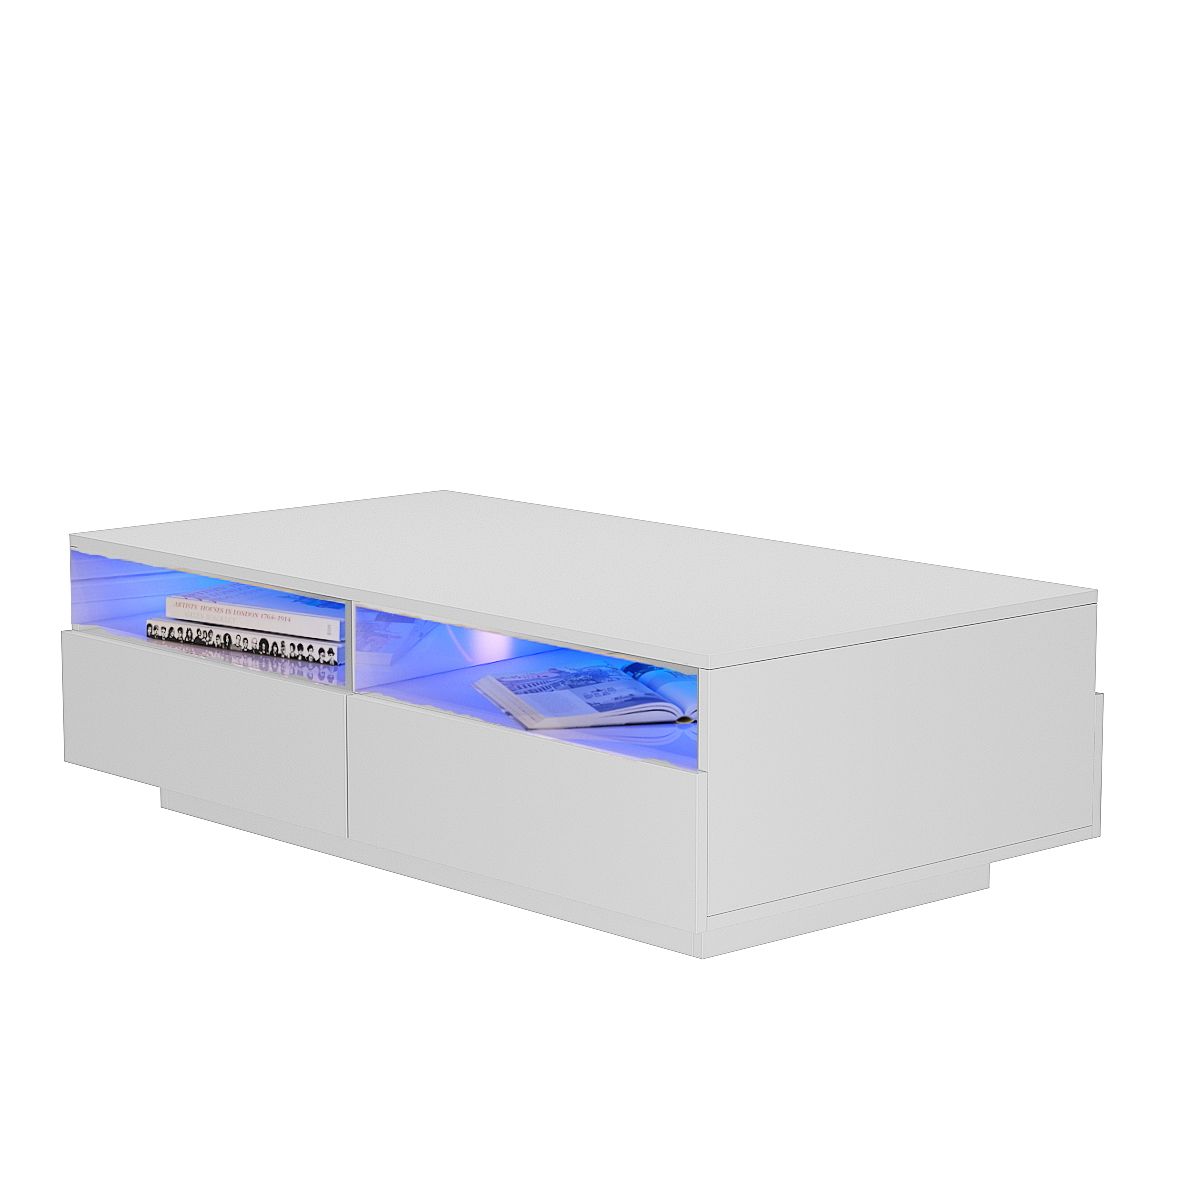 Modern High Gloss White Led Light Coffee Table W/4 Drawers Living Room Inside Led Coffee Tables With 4 Drawers (Gallery 8 of 20)